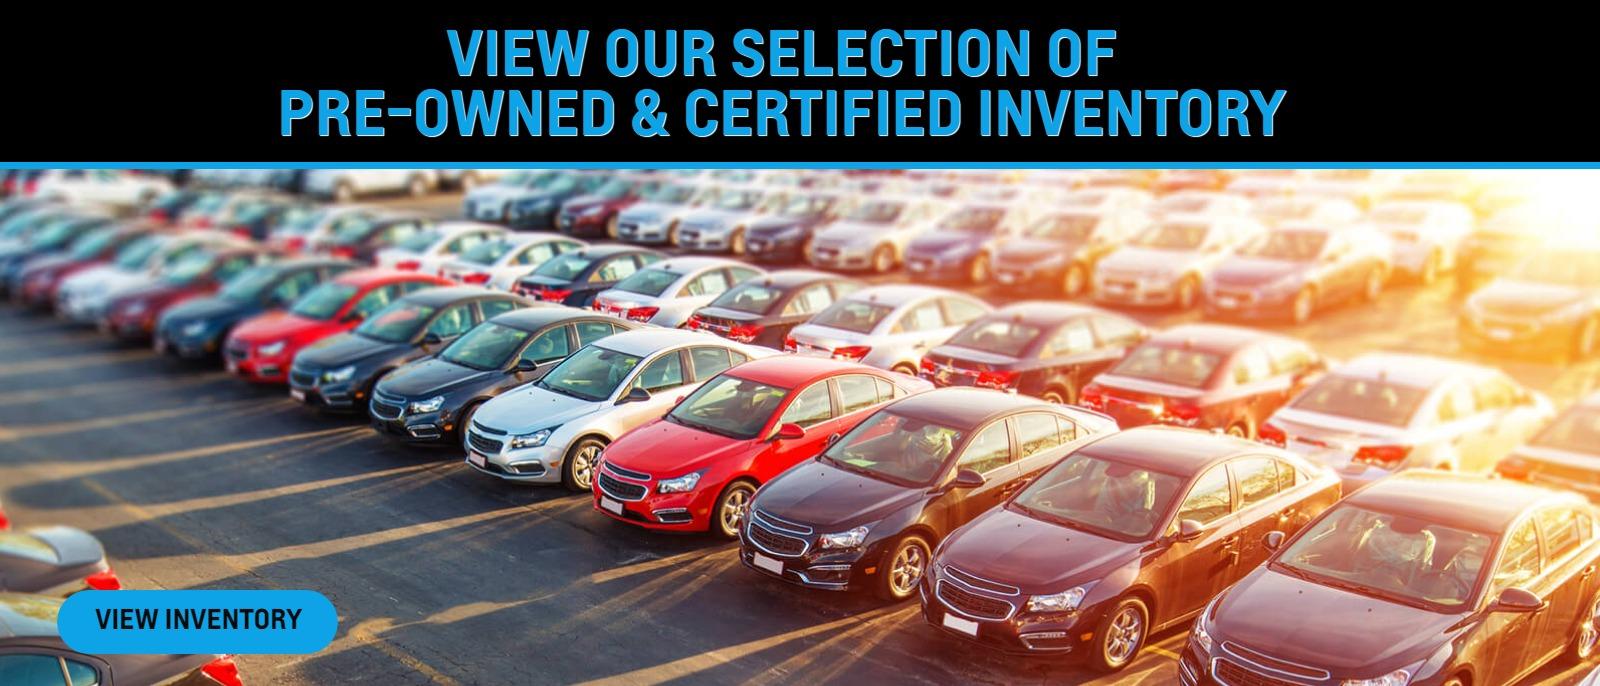 VIEW OUR SELECTION OF PRE-OWNED & CERTIFIED INVENTORY.